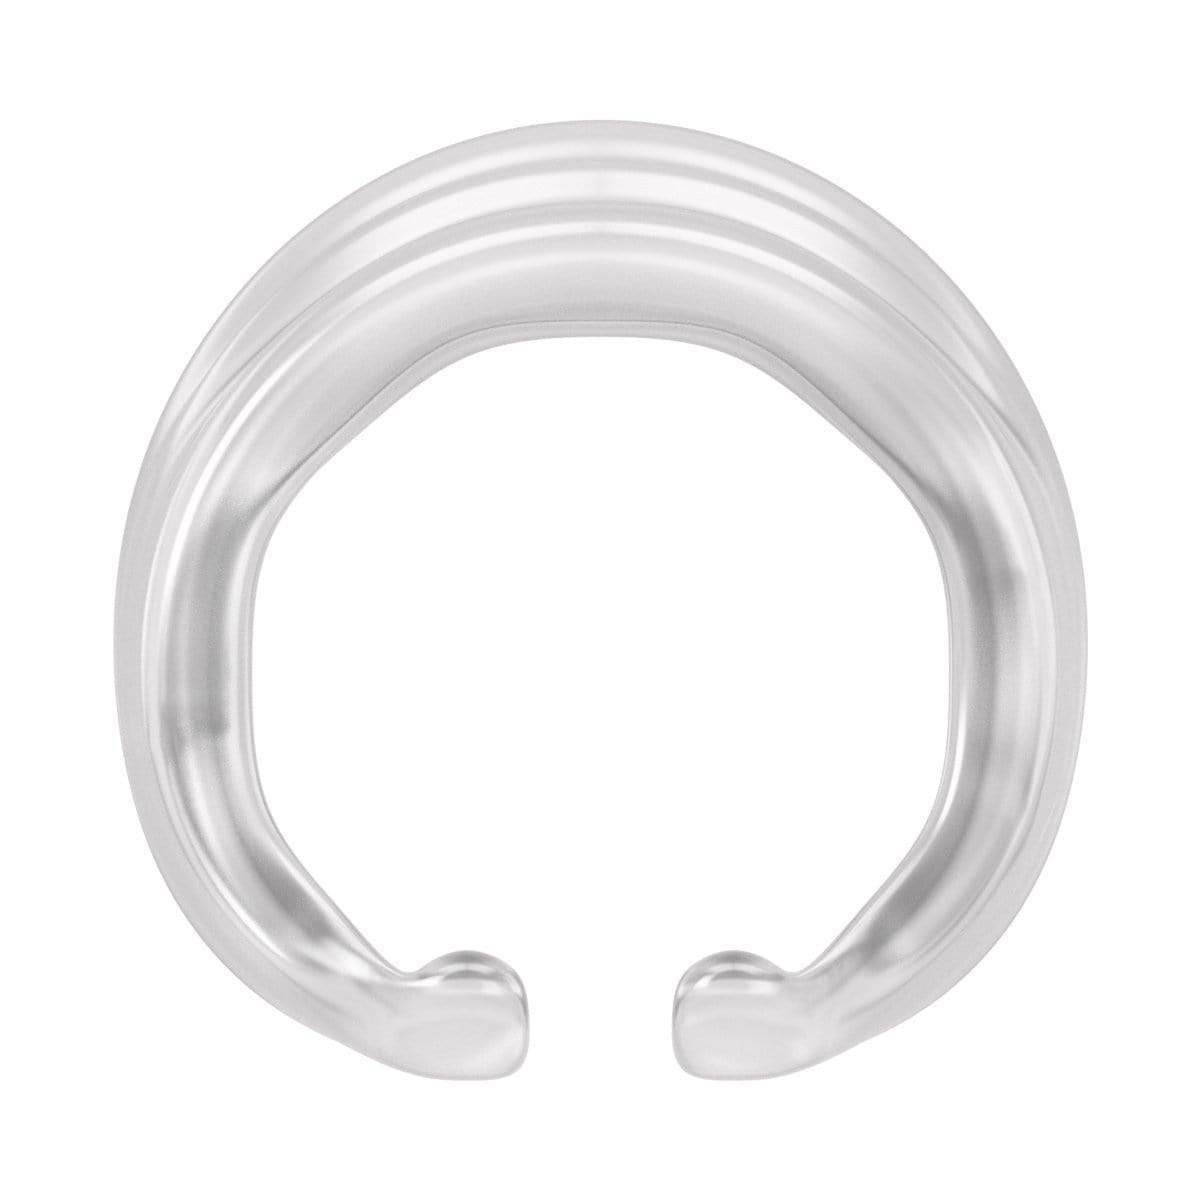 SSI Japan - My Peace Wide Soft Night Size M Correction Cock Ring (Clear) SSI1029 CherryAffairs